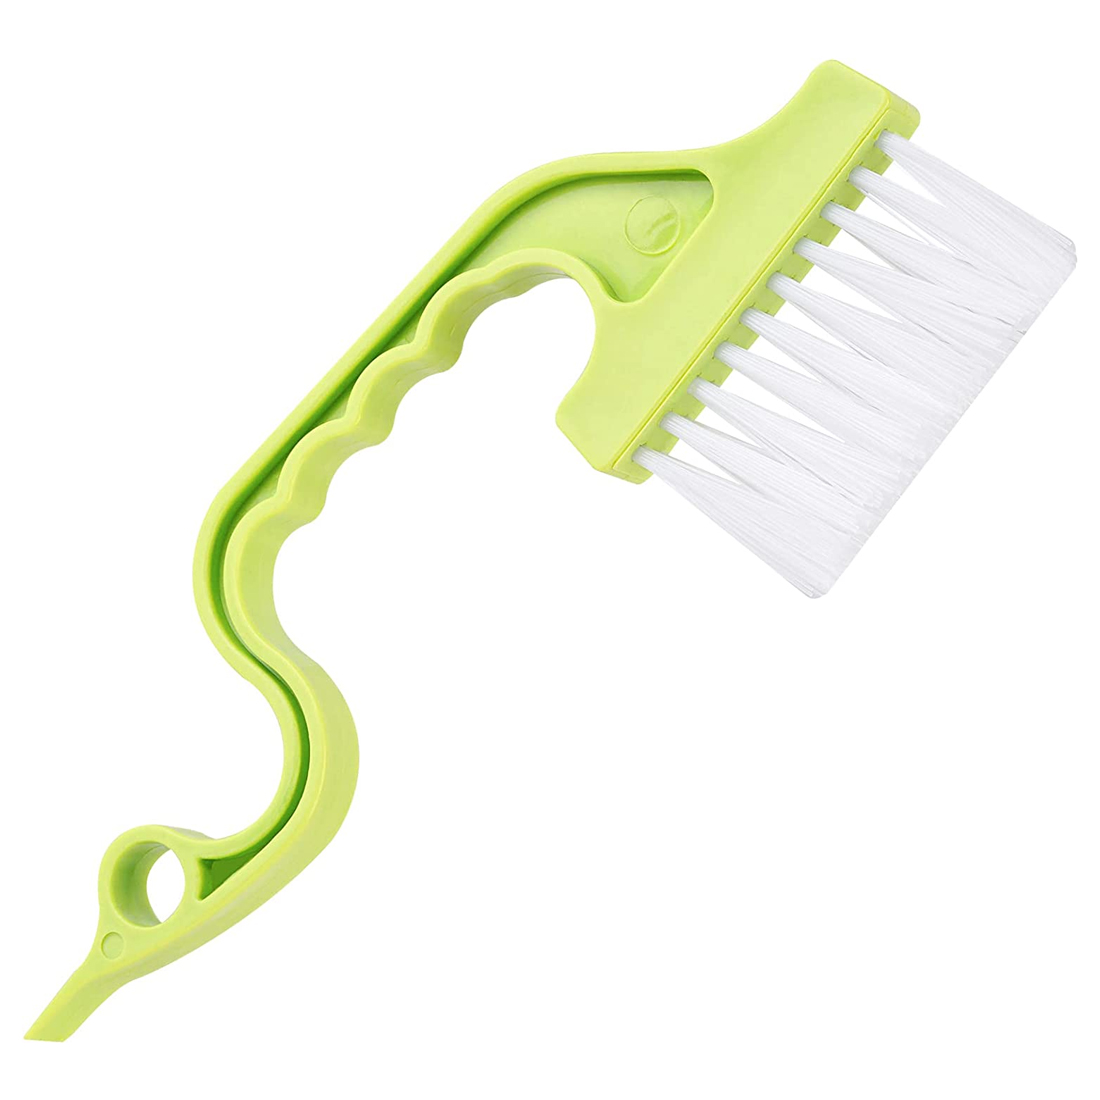 greenhome Groove Gap Cleaning Tools Reliable Safe Plastic Hand